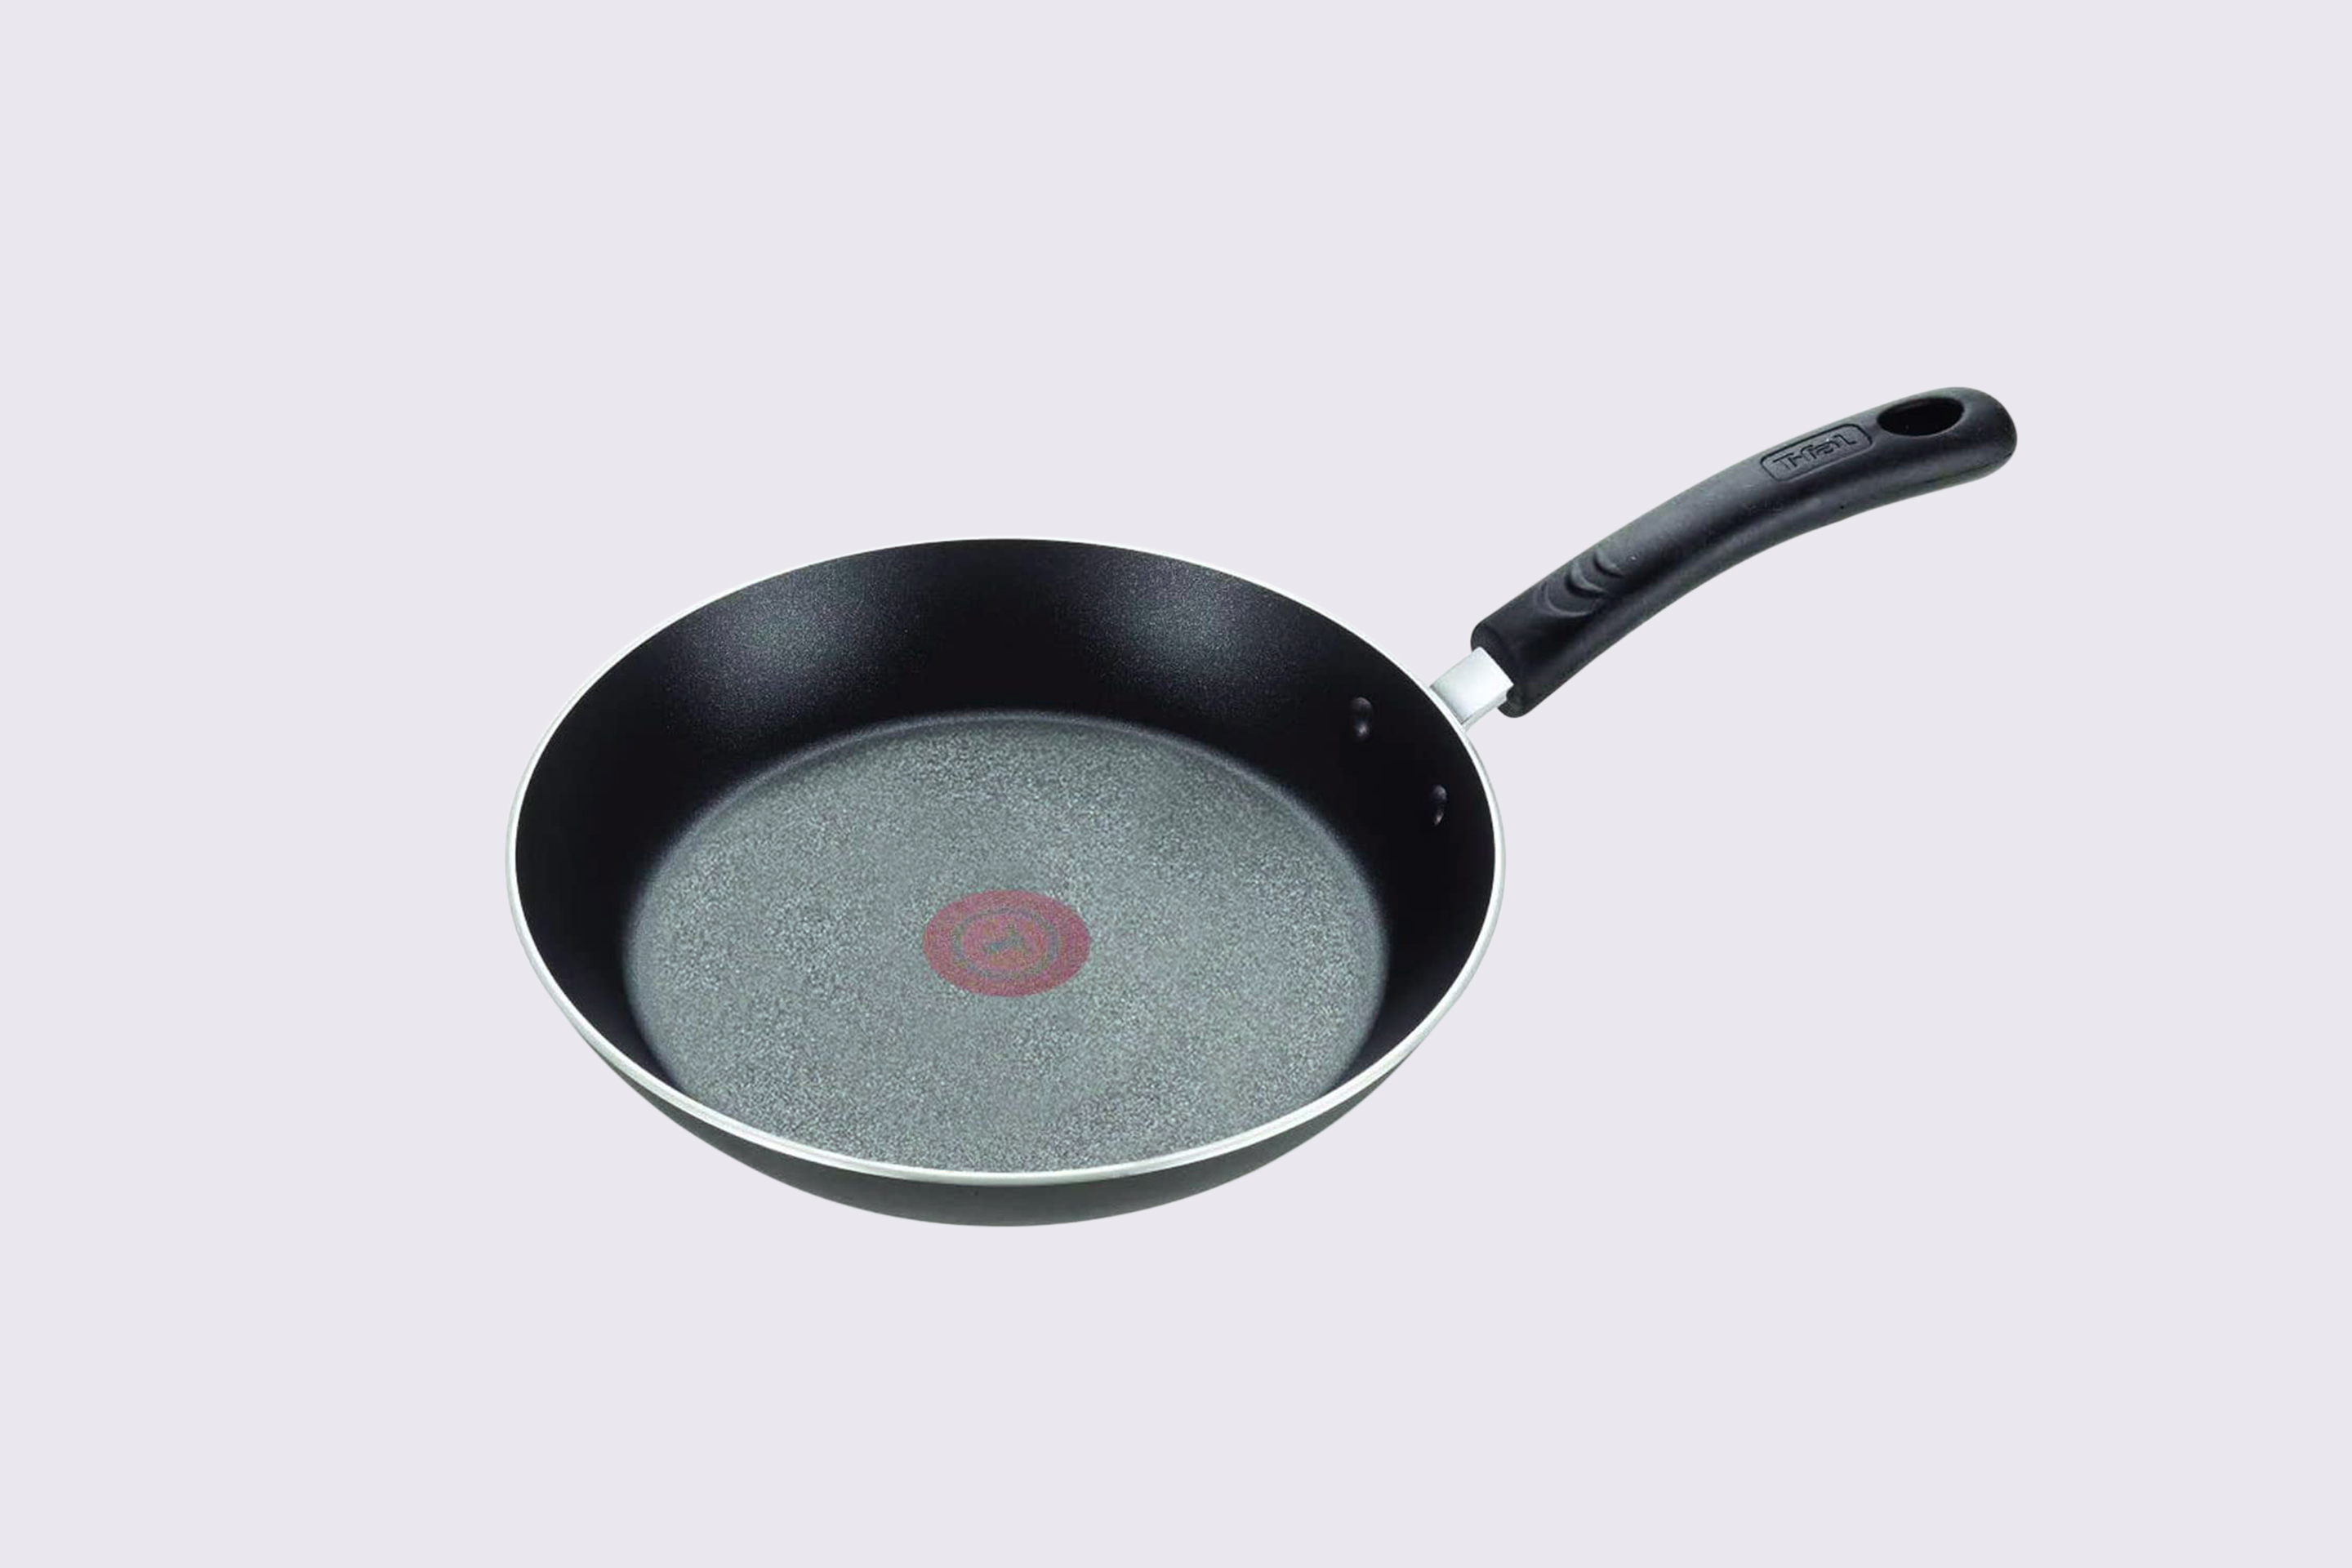 T-Fal Professional Nonstick Fry Pan 12.5 Inch